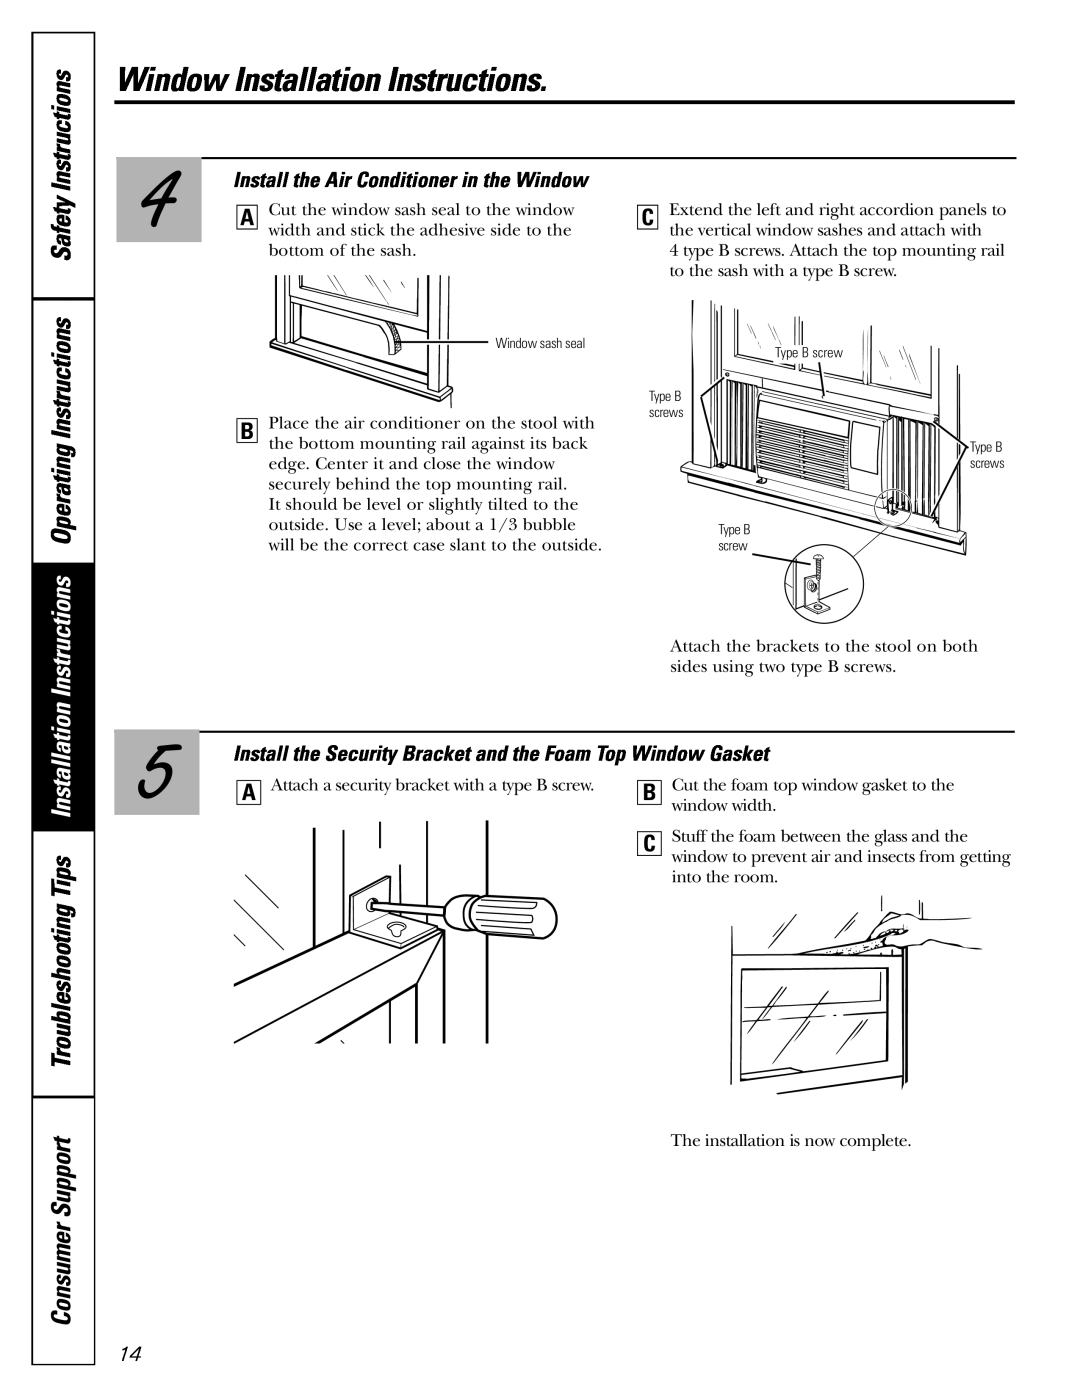 GE ASR05 Safety Instructions, Window Installation Instructions, Install the Air Conditioner in the Window 